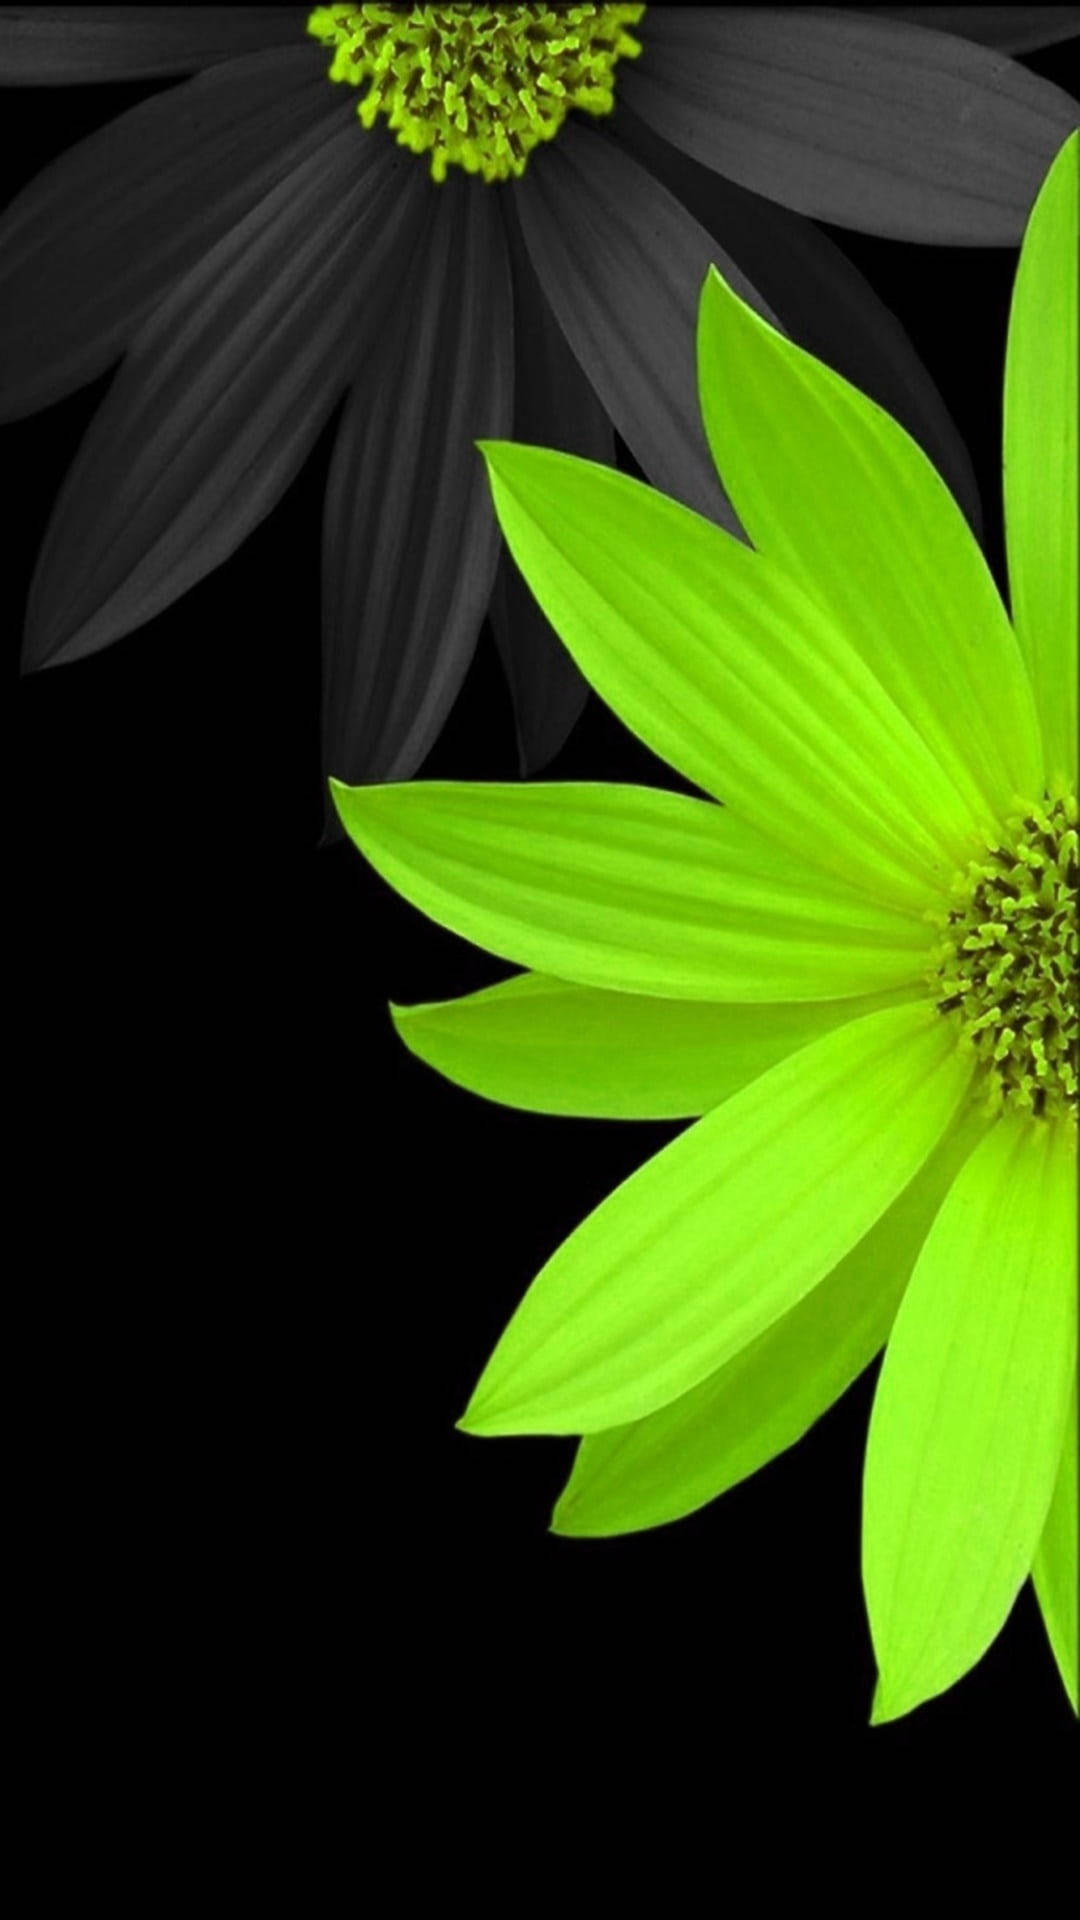 Grey And Yellow Daisies Flower Mobile Wallpaper